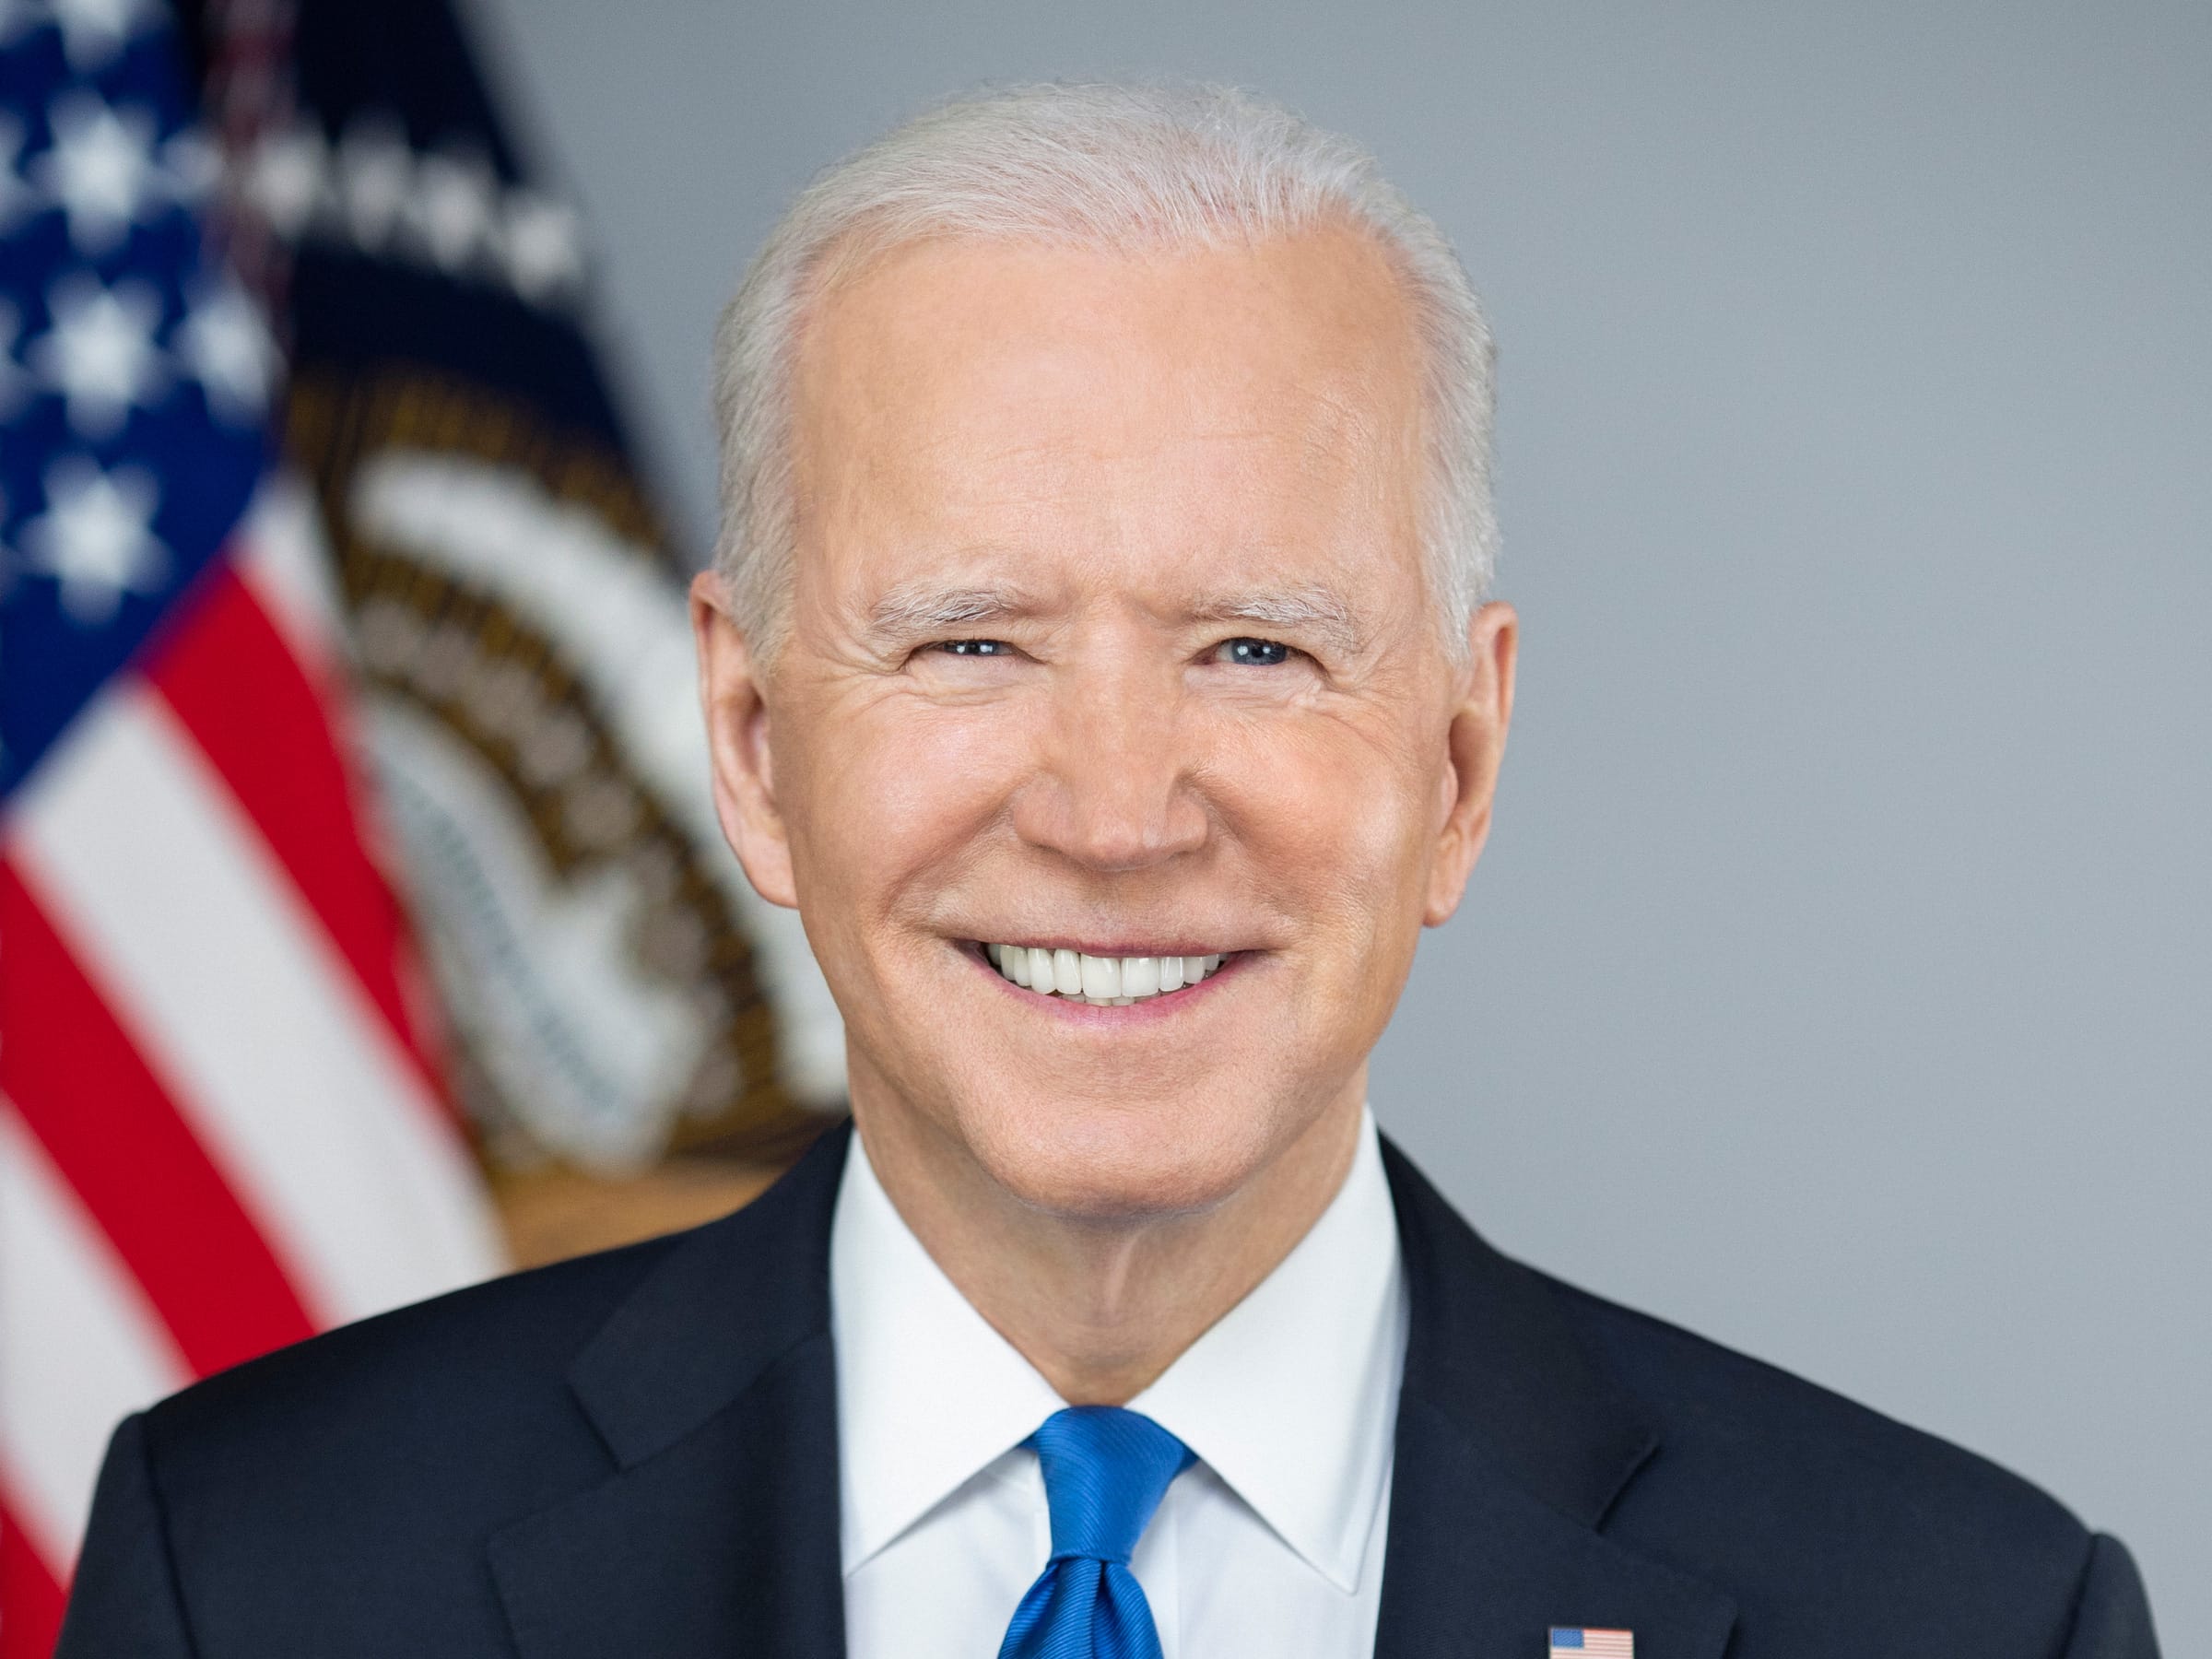 what did joe biden do as vice president - Biden|President|Joe|Years|Trump|Delaware|Vice|Time|Obama|Senate|States|Law|Age|Campaign|Election|Administration|Family|House|Senator|Office|School|Wife|People|Hunter|University|Act|State|Year|Life|Party|Committee|Children|Beau|Daughter|War|Jill|Day|Facts|Americans|Presidency|Joe Biden|United States|Vice President|White House|Law School|President Trump|Foreign Relations Committee|Donald Trump|President Biden|Presidential Campaign|Presidential Election|Democratic Party|Syracuse University|United Nations|Net Worth|Barack Obama|Judiciary Committee|Neilia Hunter|U.S. Senate|Hillary Clinton|New York Times|Obama Administration|Empty Store Shelves|Systemic Racism|Castle County Council|Archmere Academy|U.S. Senator|Vice Presidency|Second Term|Biden Administration